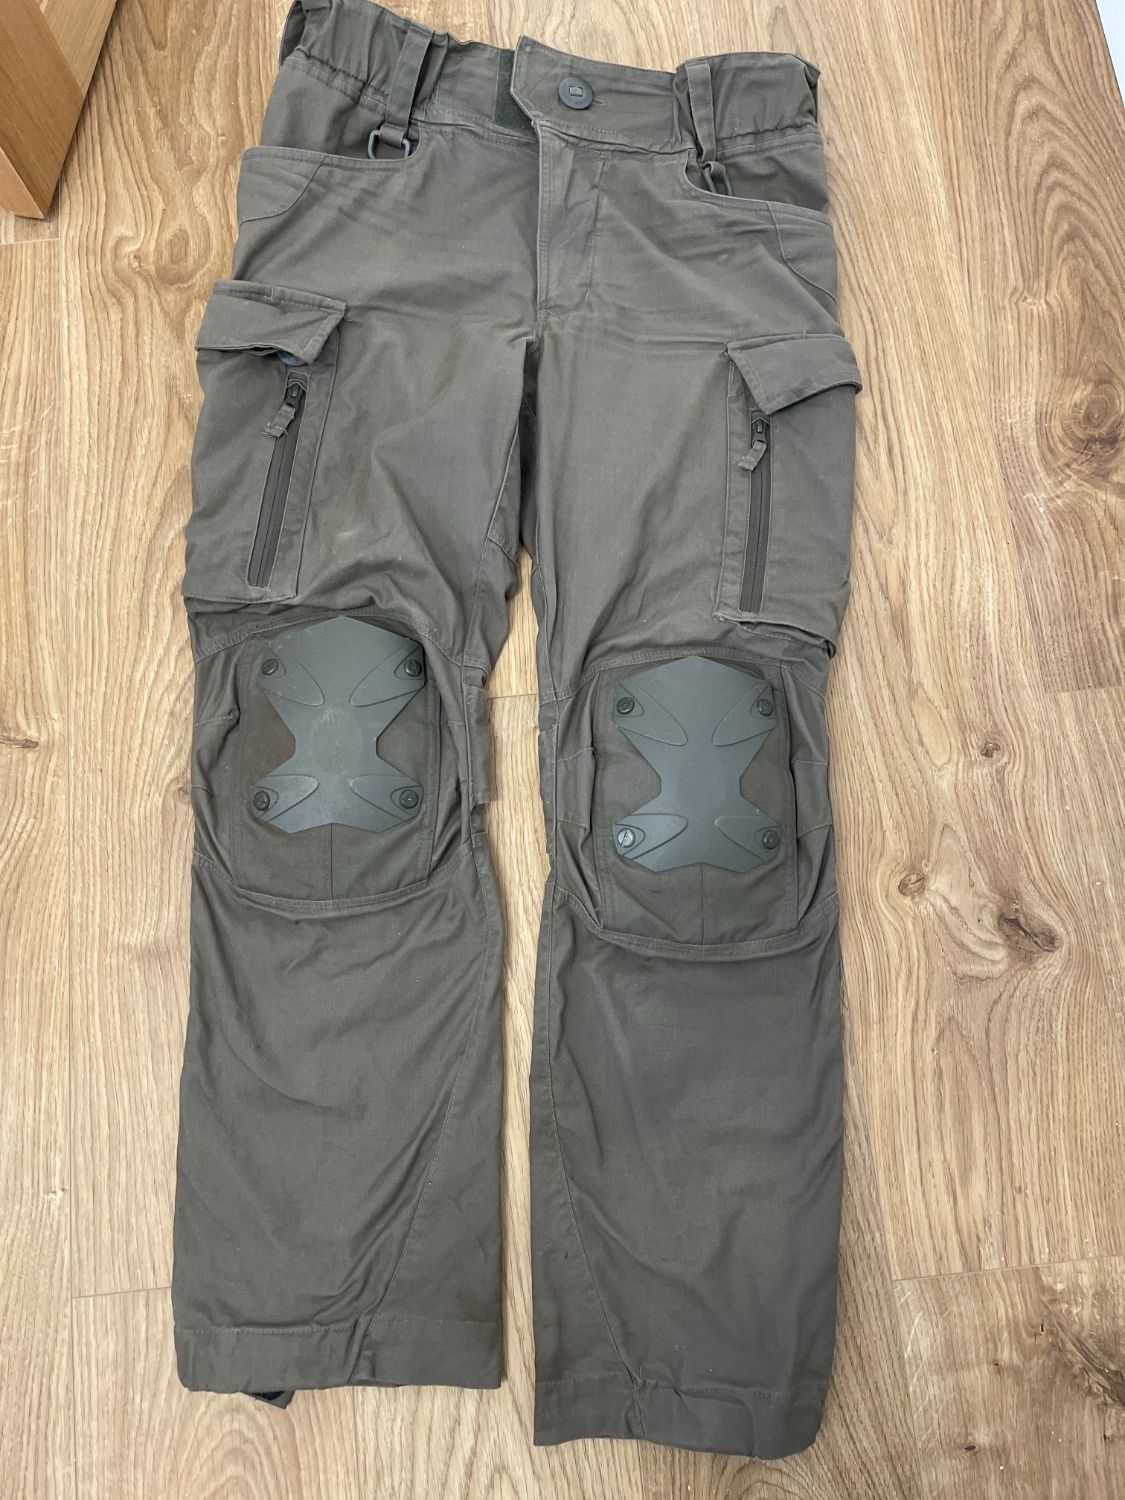 Used Clawgear raider mk4 trousers with D30 knee pads - Gear - Airsoft ...